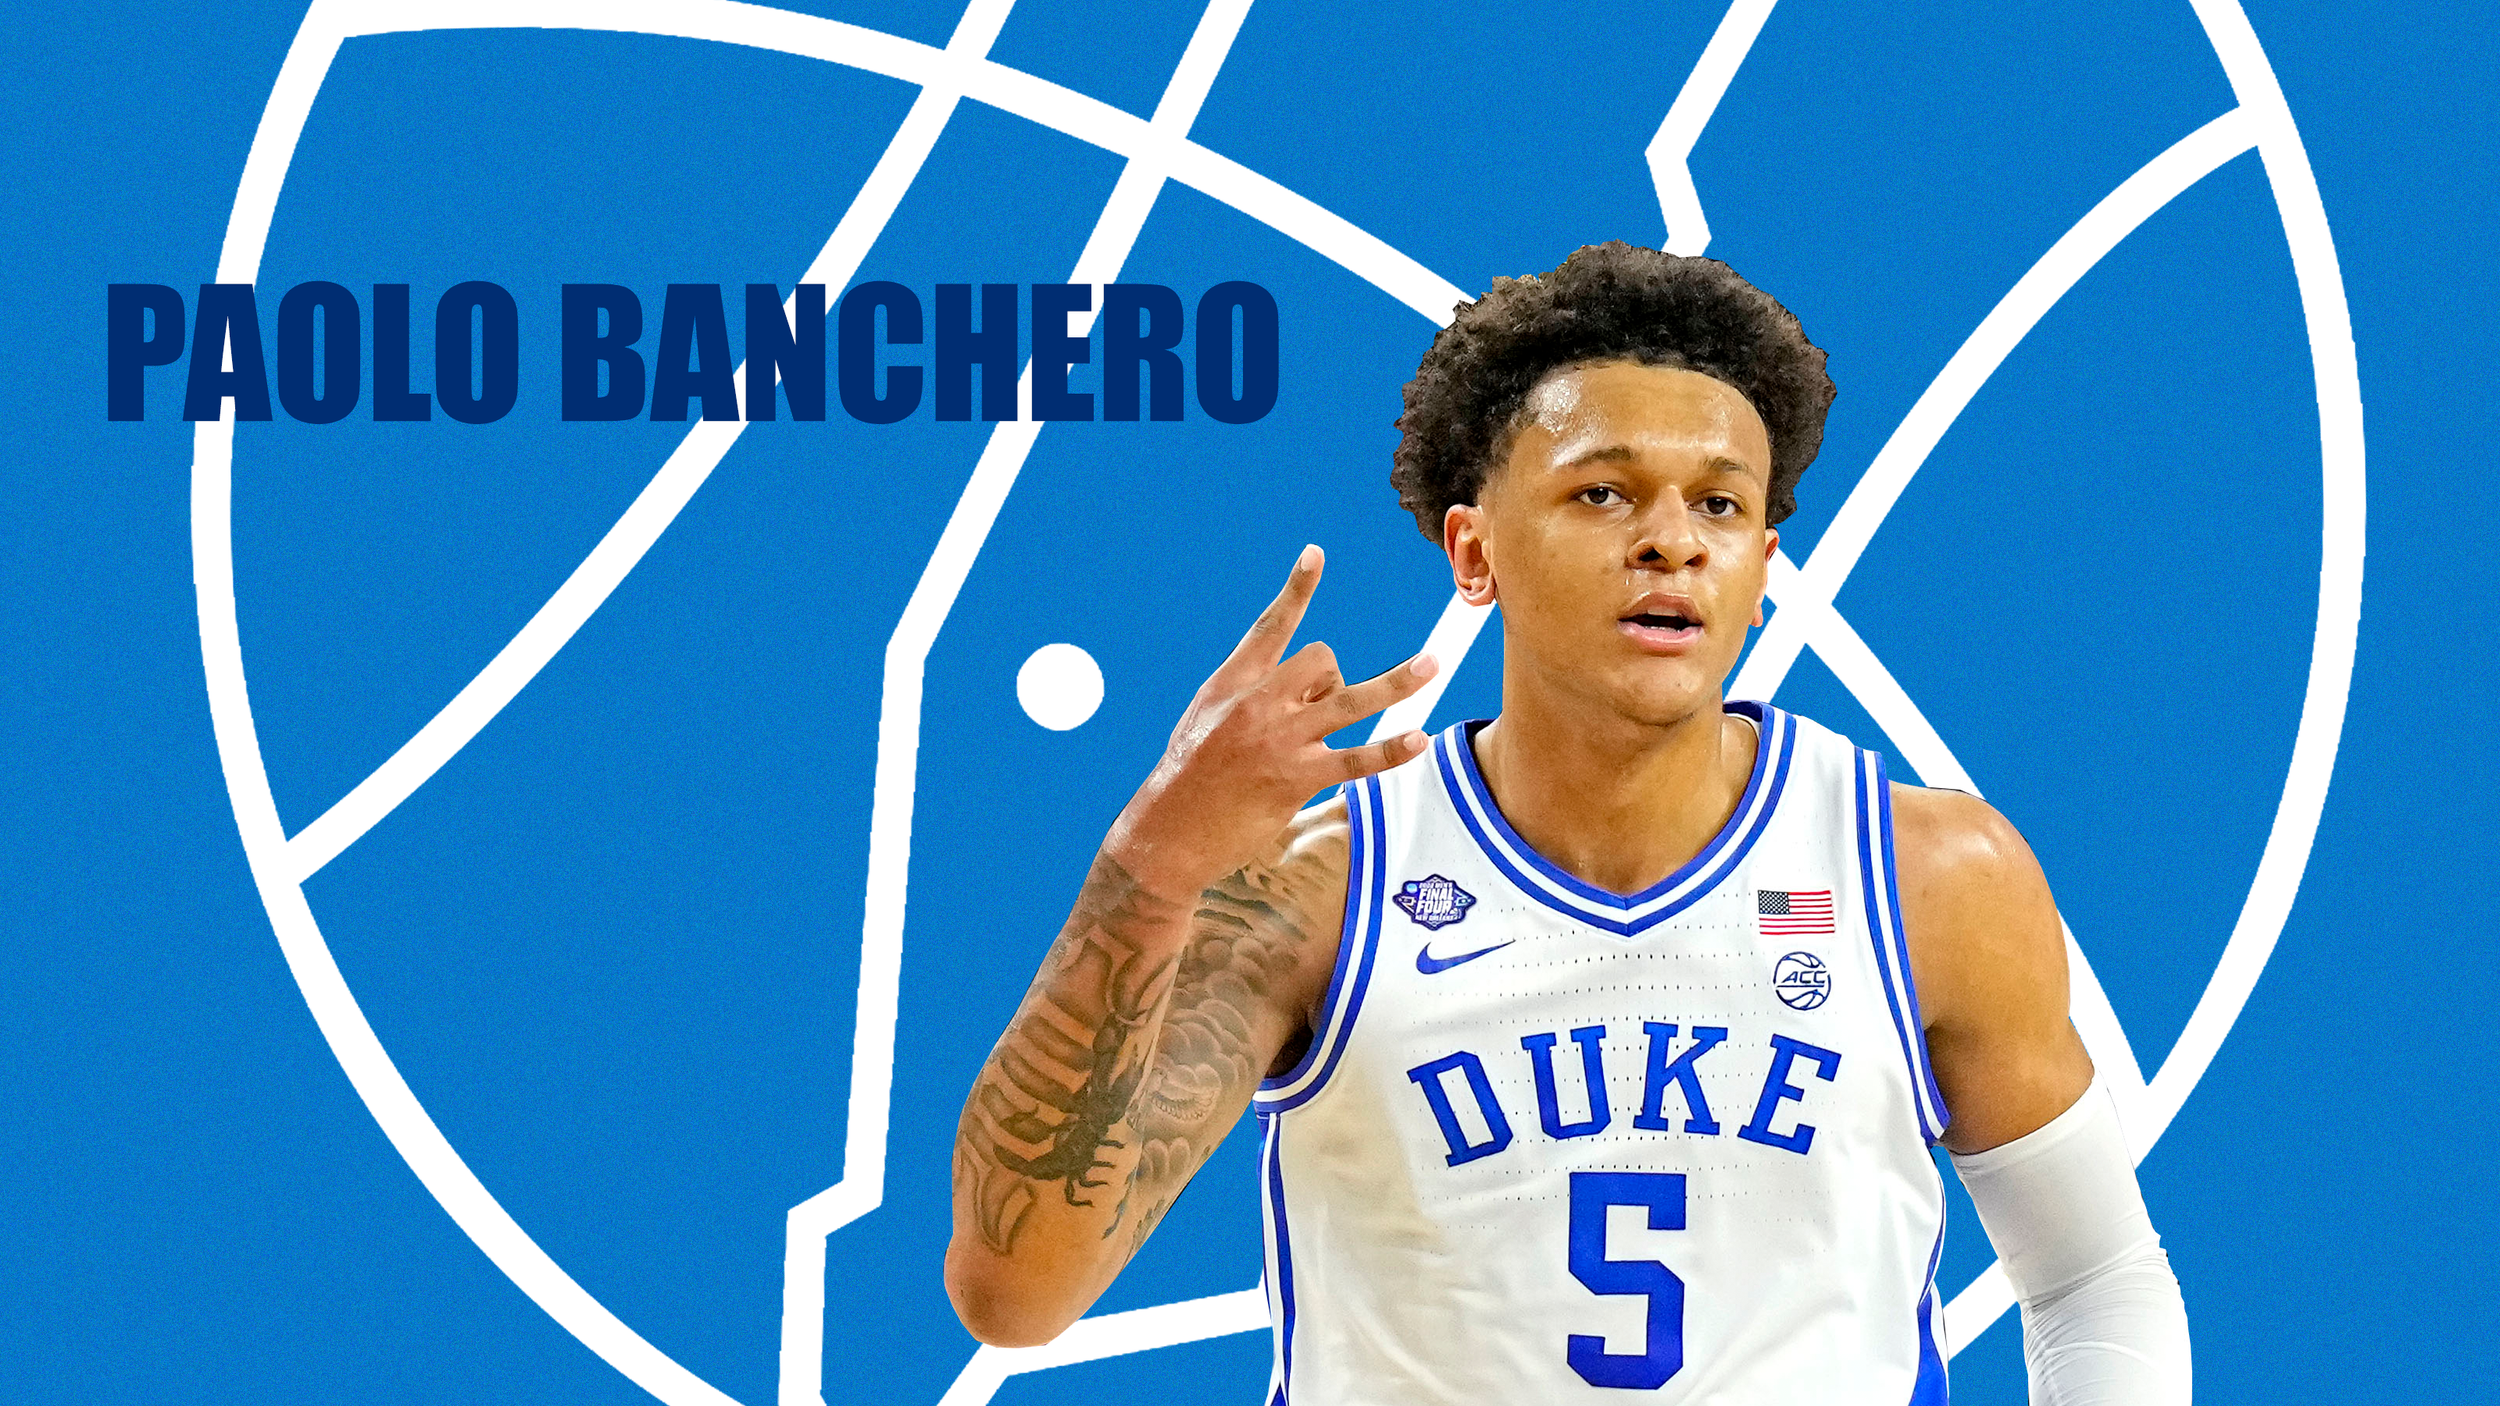 Who is No 1 pick Paolo Banchero and how old is he?